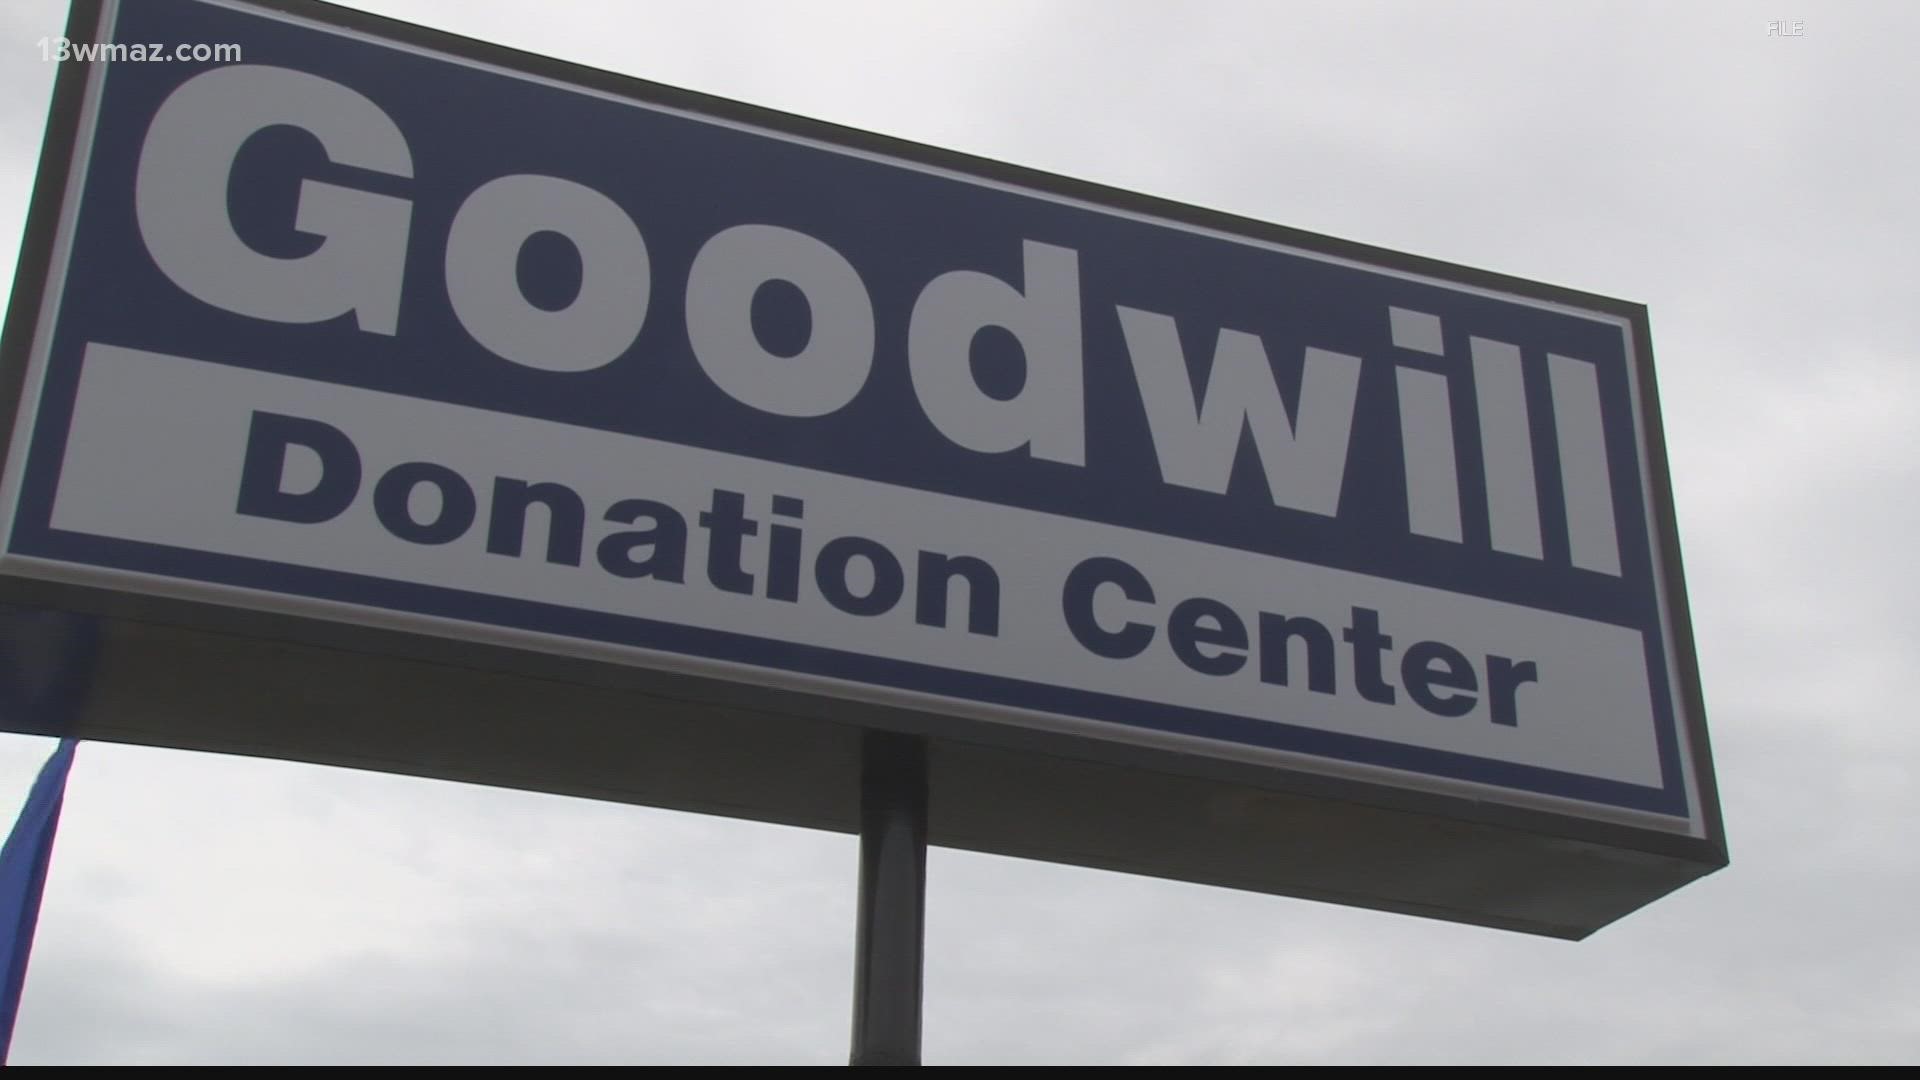 Goodwill robbery